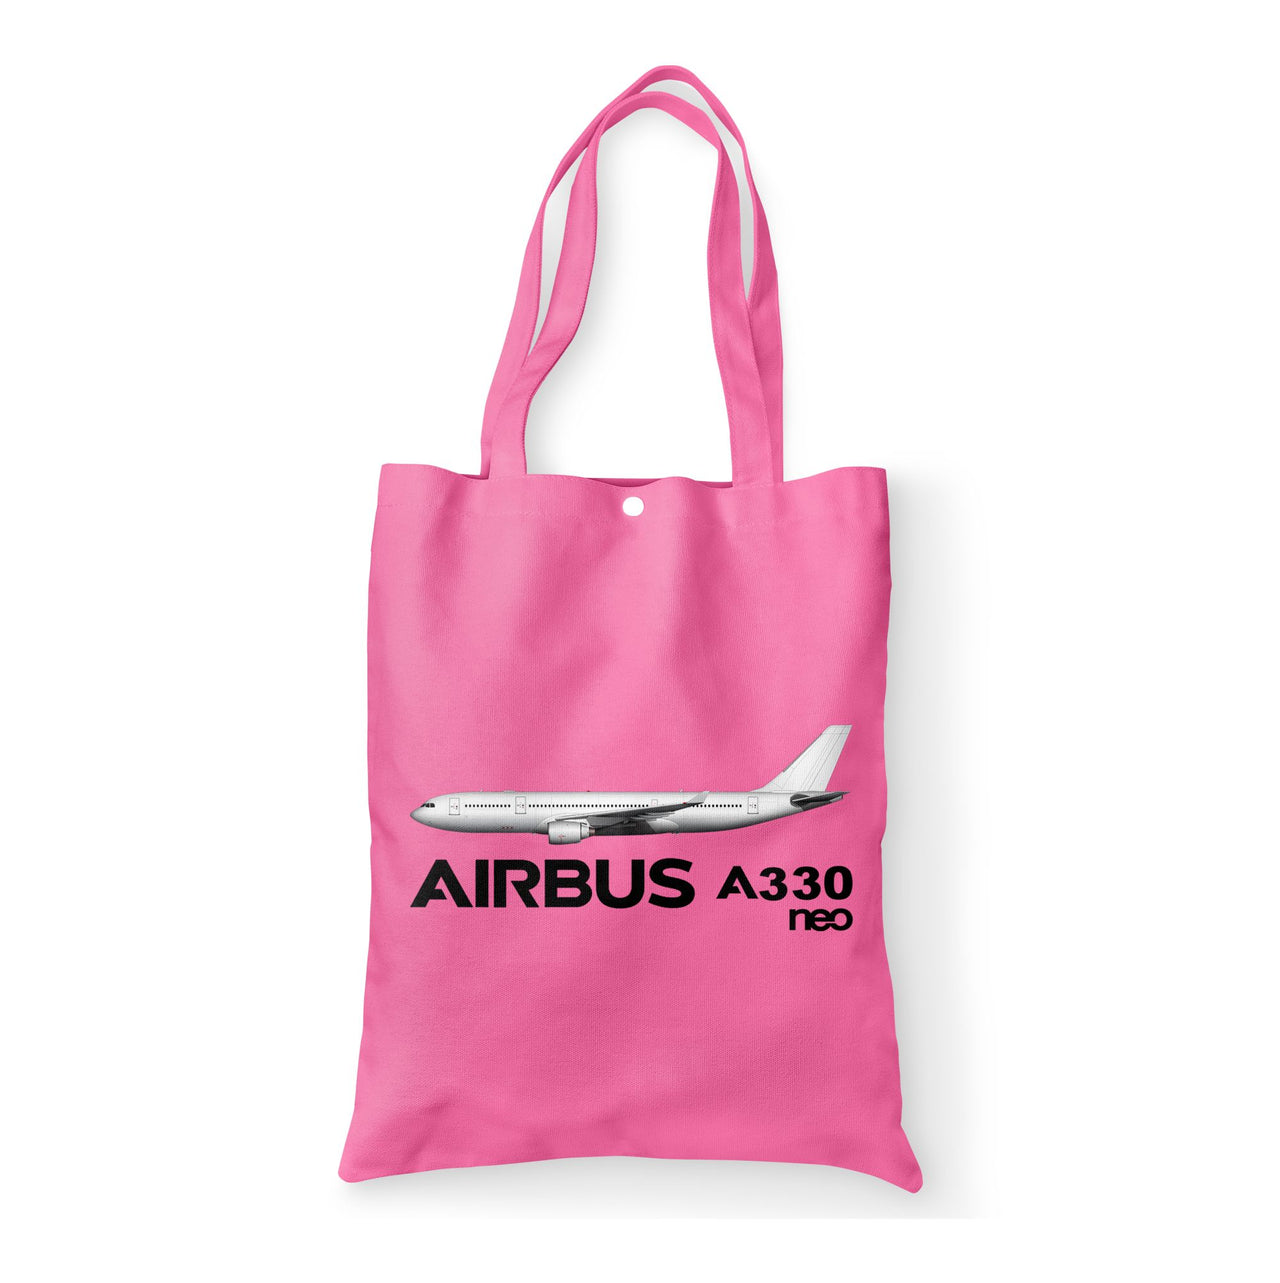 The Airbus A330neo Designed Tote Bags